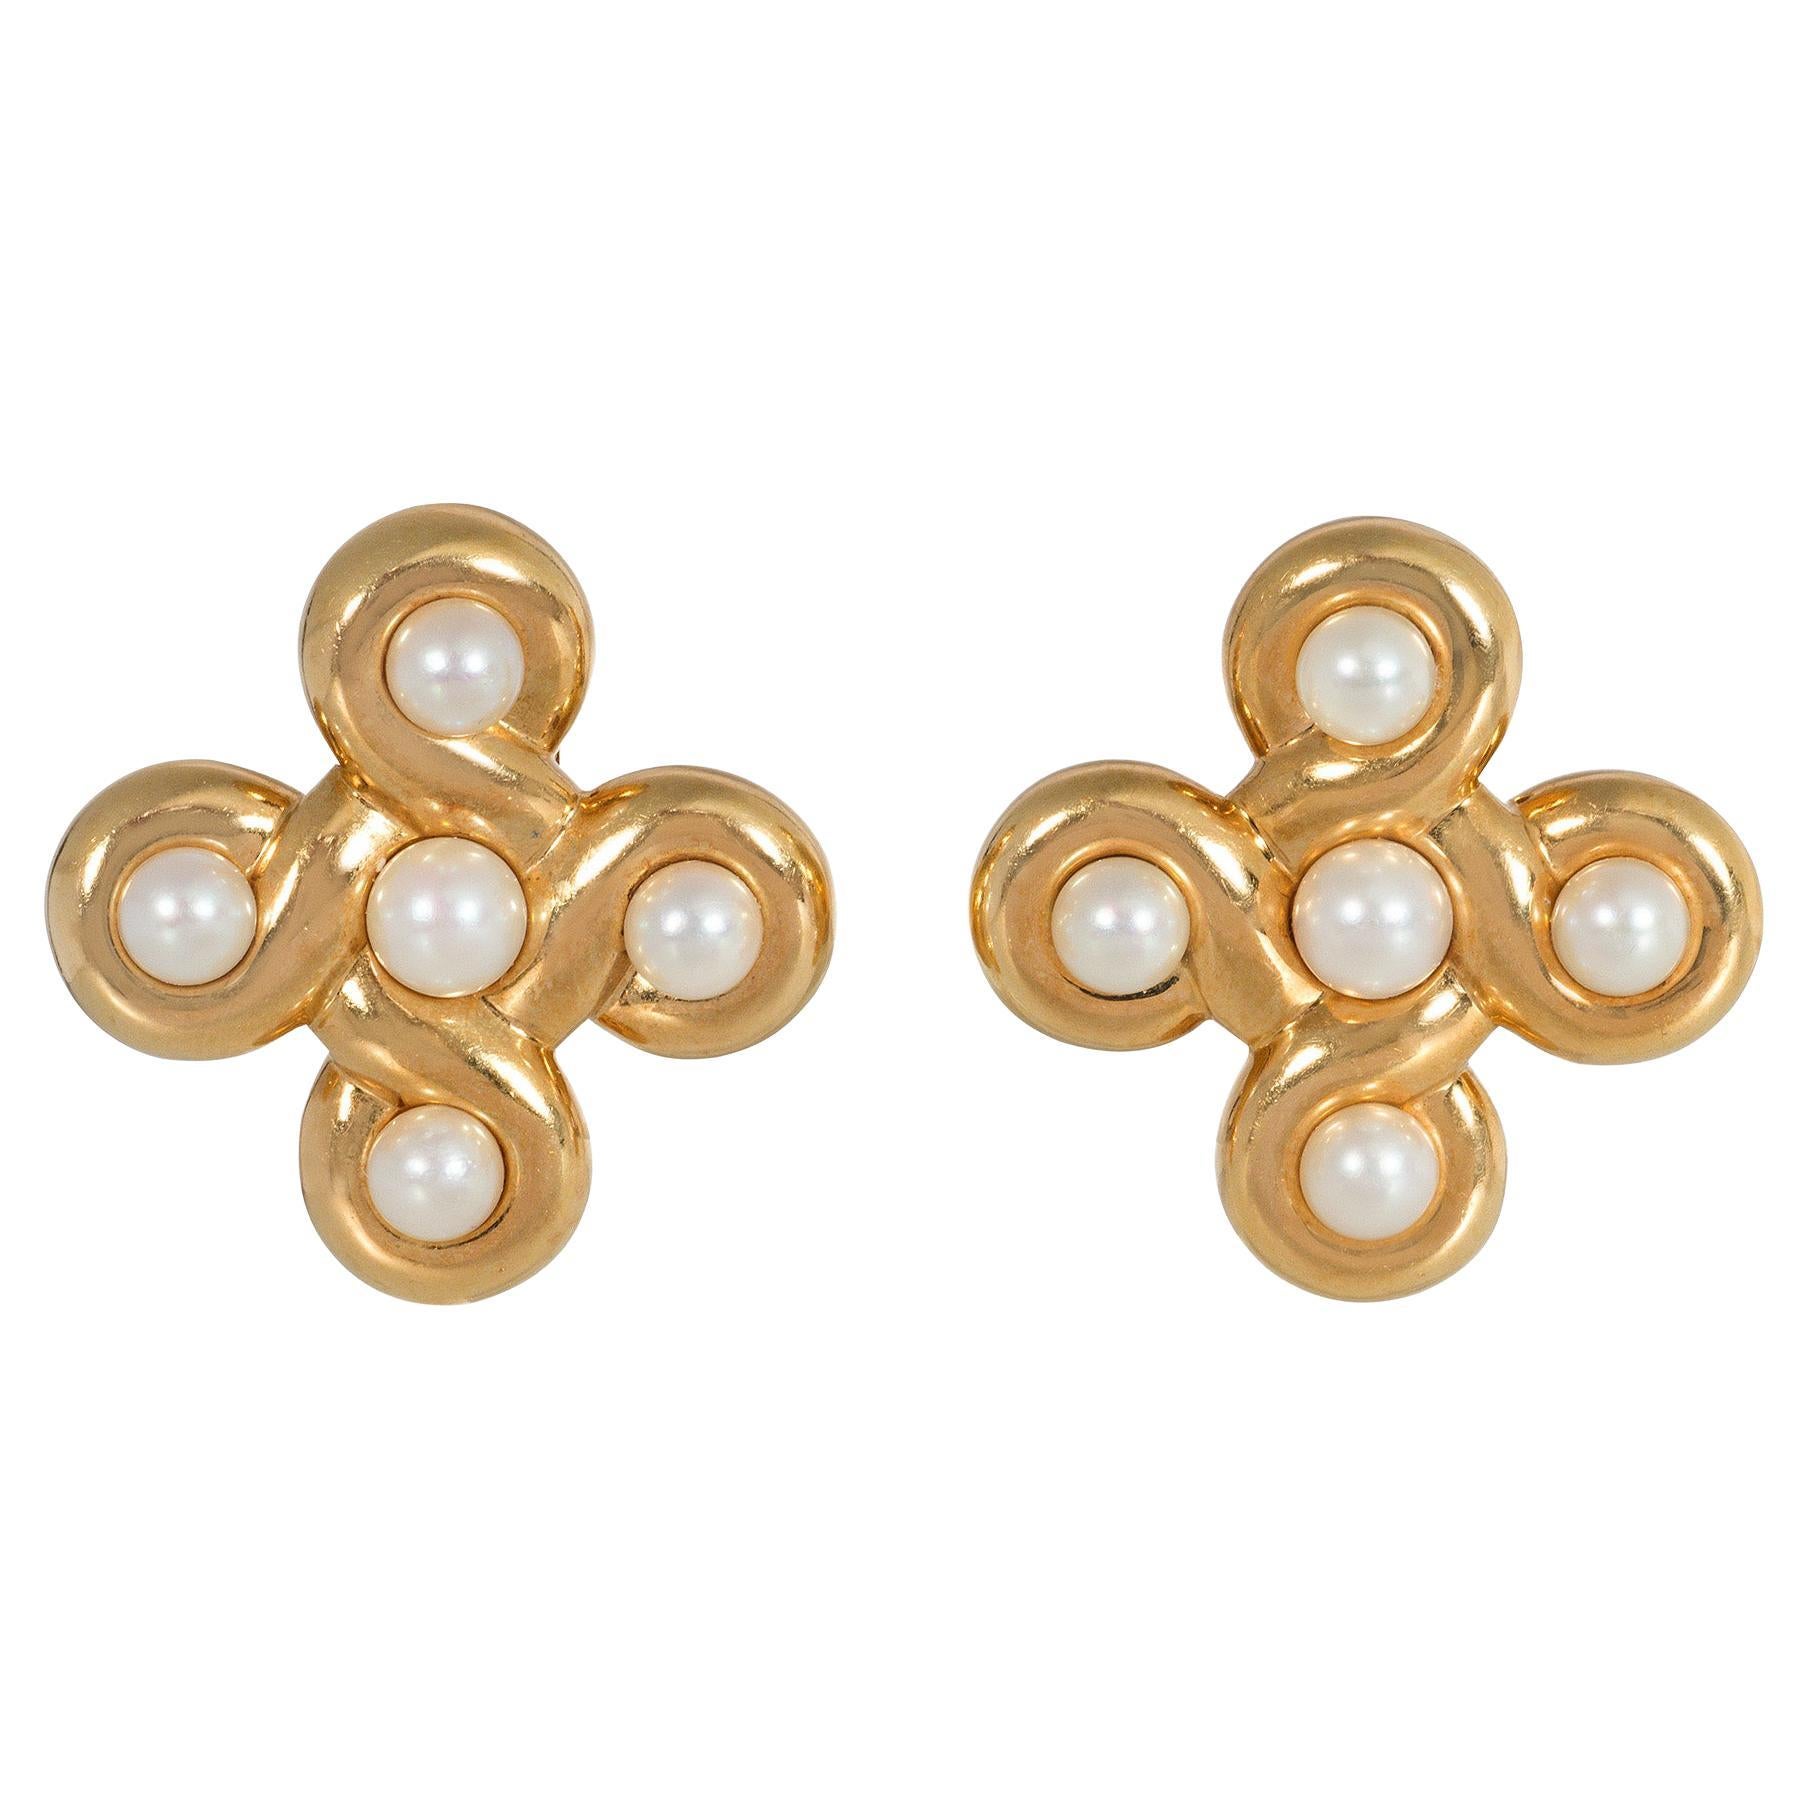 Chanel Estate Gold and Pearl Quatrefoil Clip Earrings